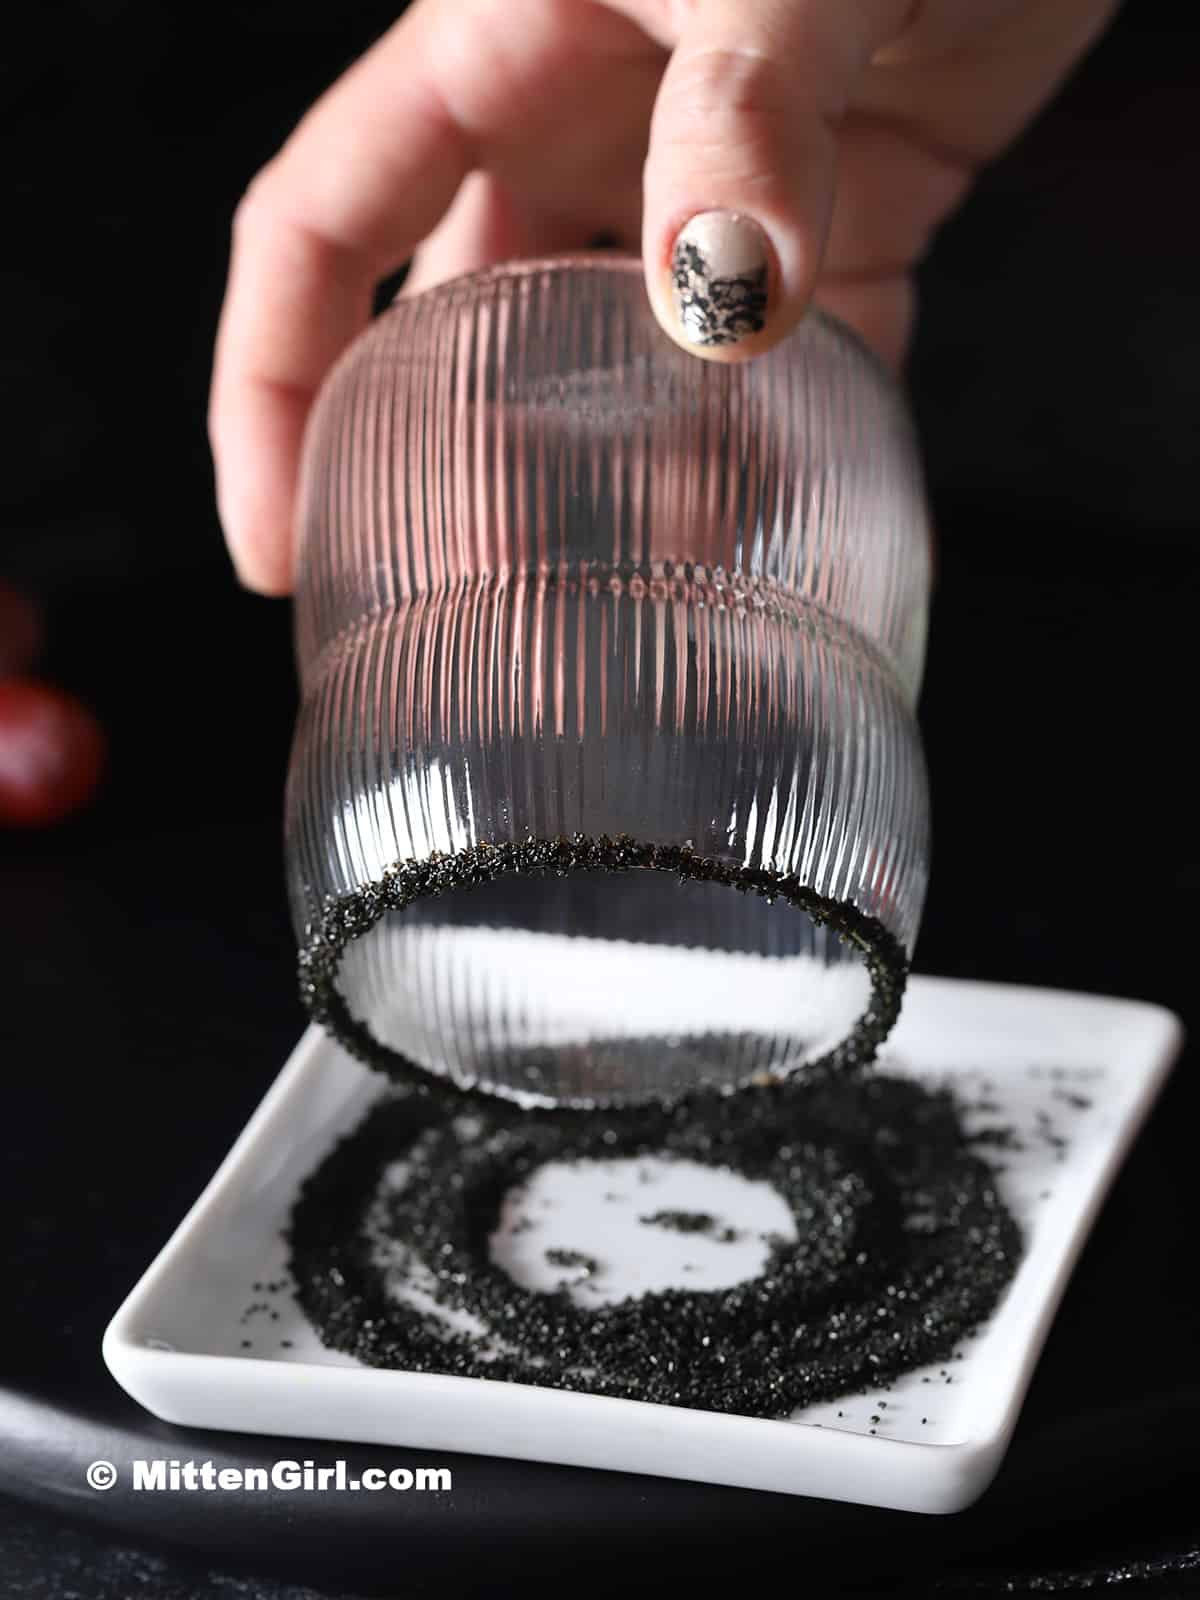 A hand rolling the rim of a glass in a small plate of black sugar.